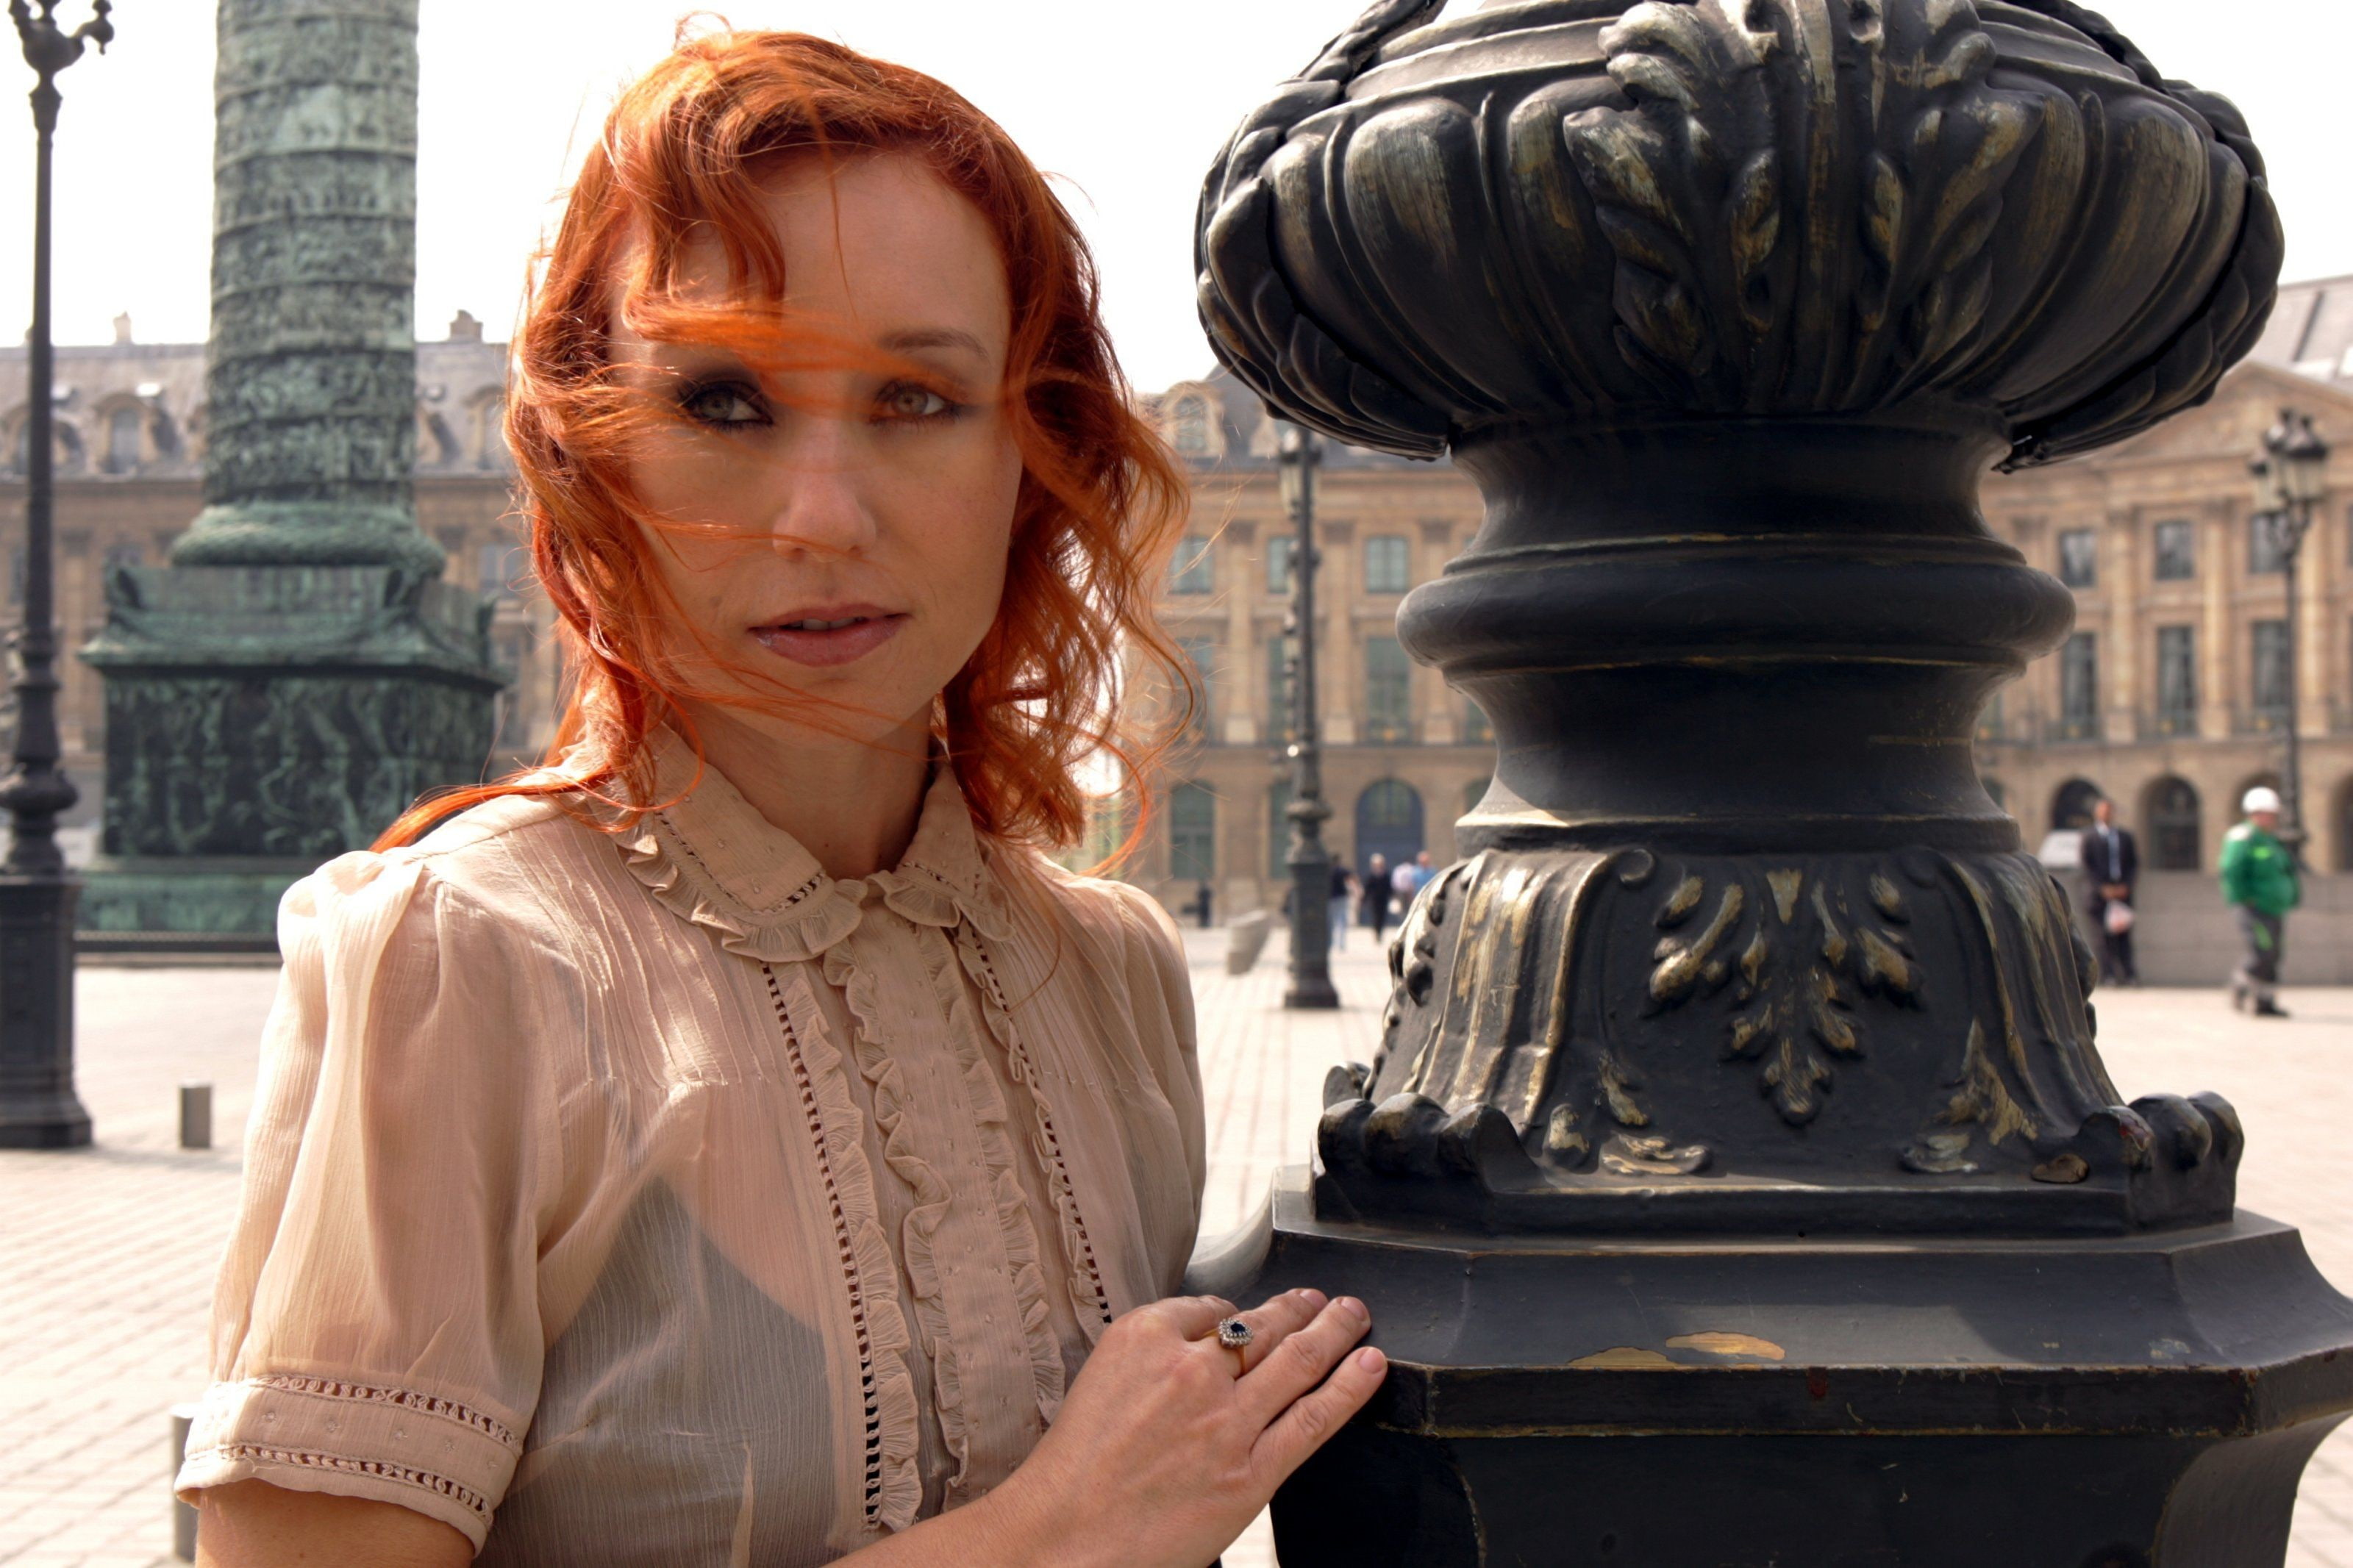 Tori Amos, women, singer, redhead, one person, front view, architecture